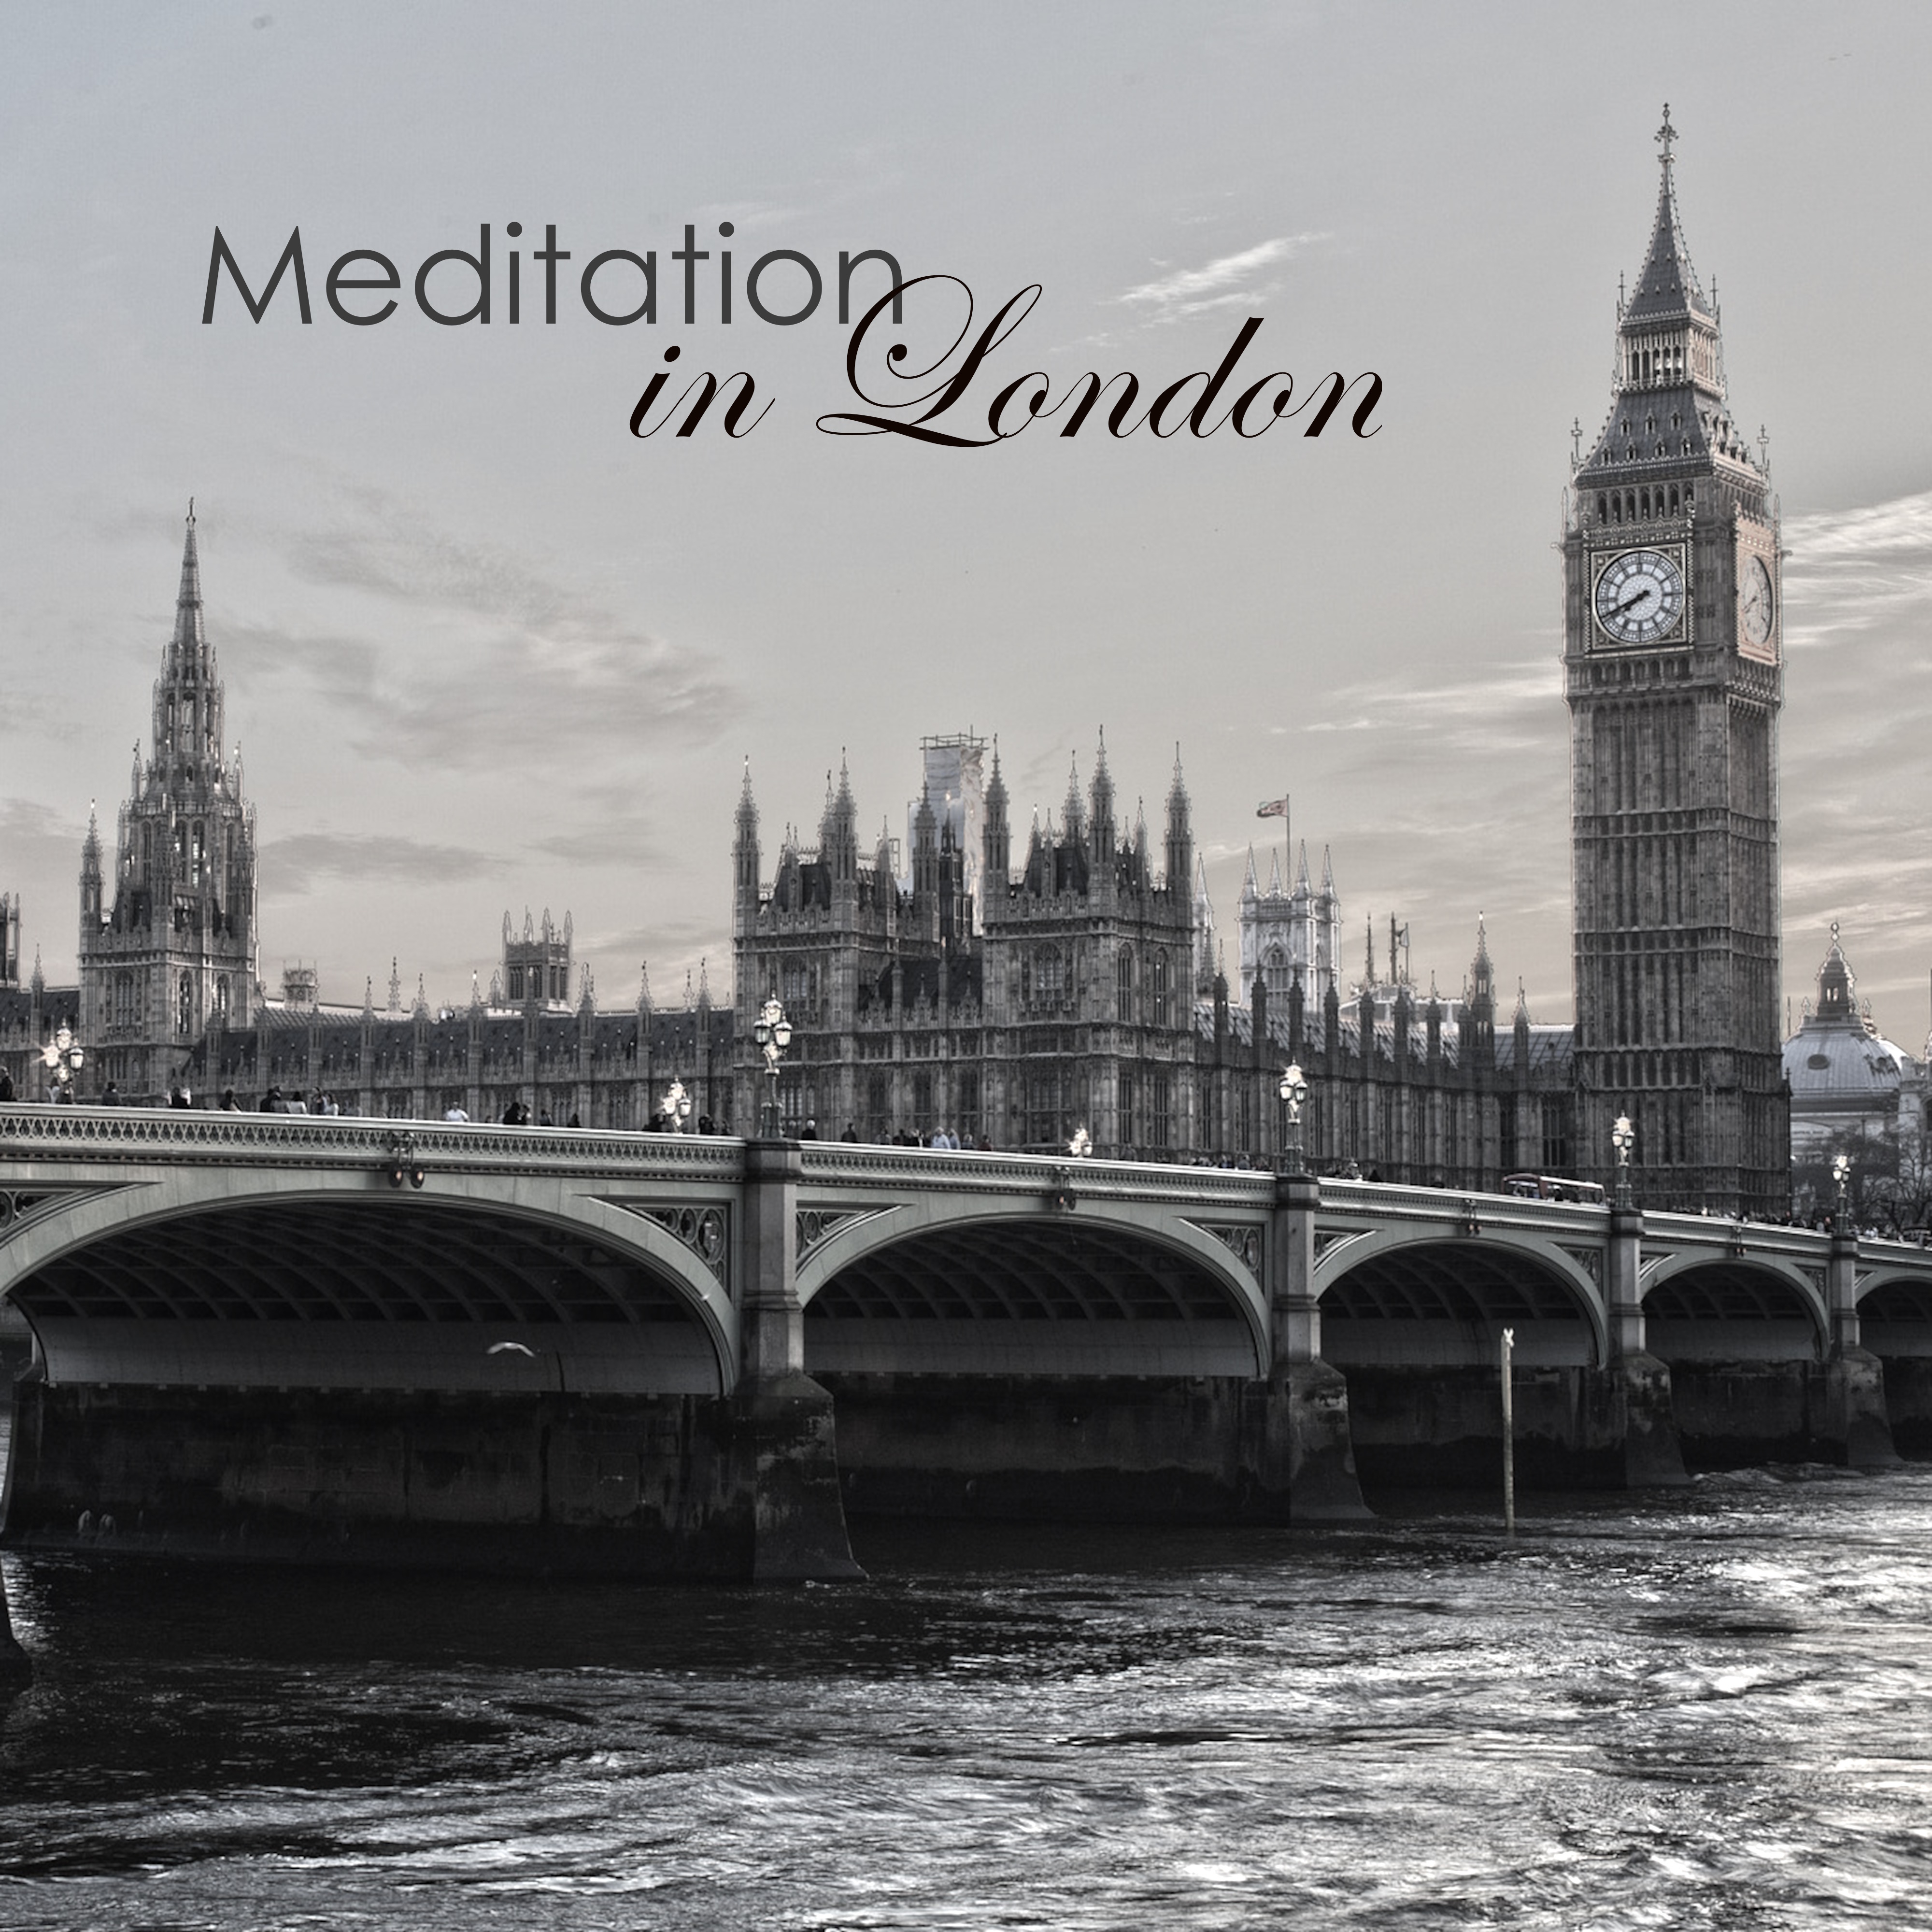 Meditation in London - Best Meditation Music & Relaxing Zen Music for Mindfulness Activities and Meditation Retreats